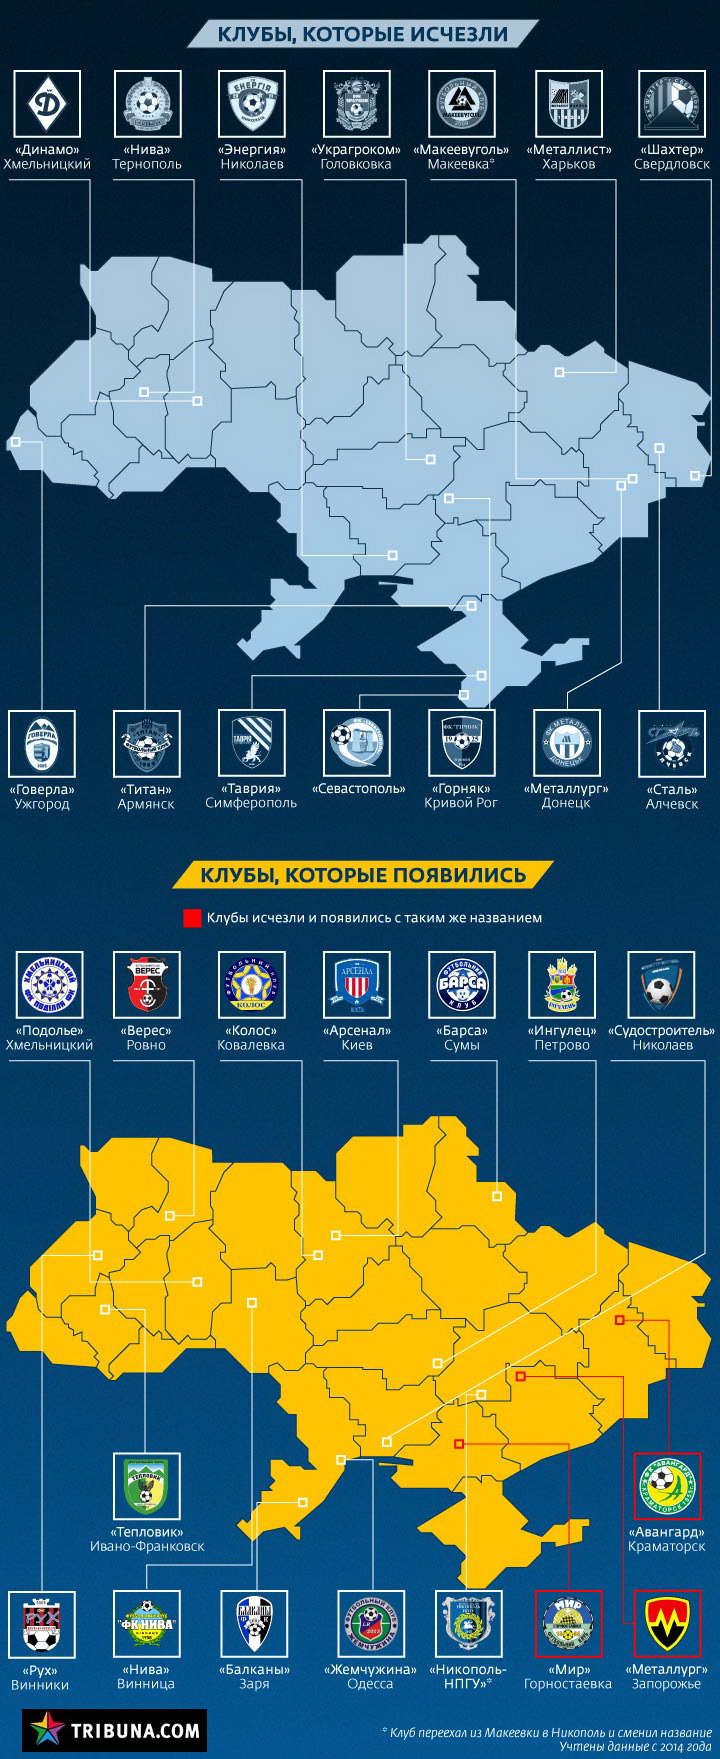 The ever-changing landscape of Ukrainian football document in this Tribuna map.